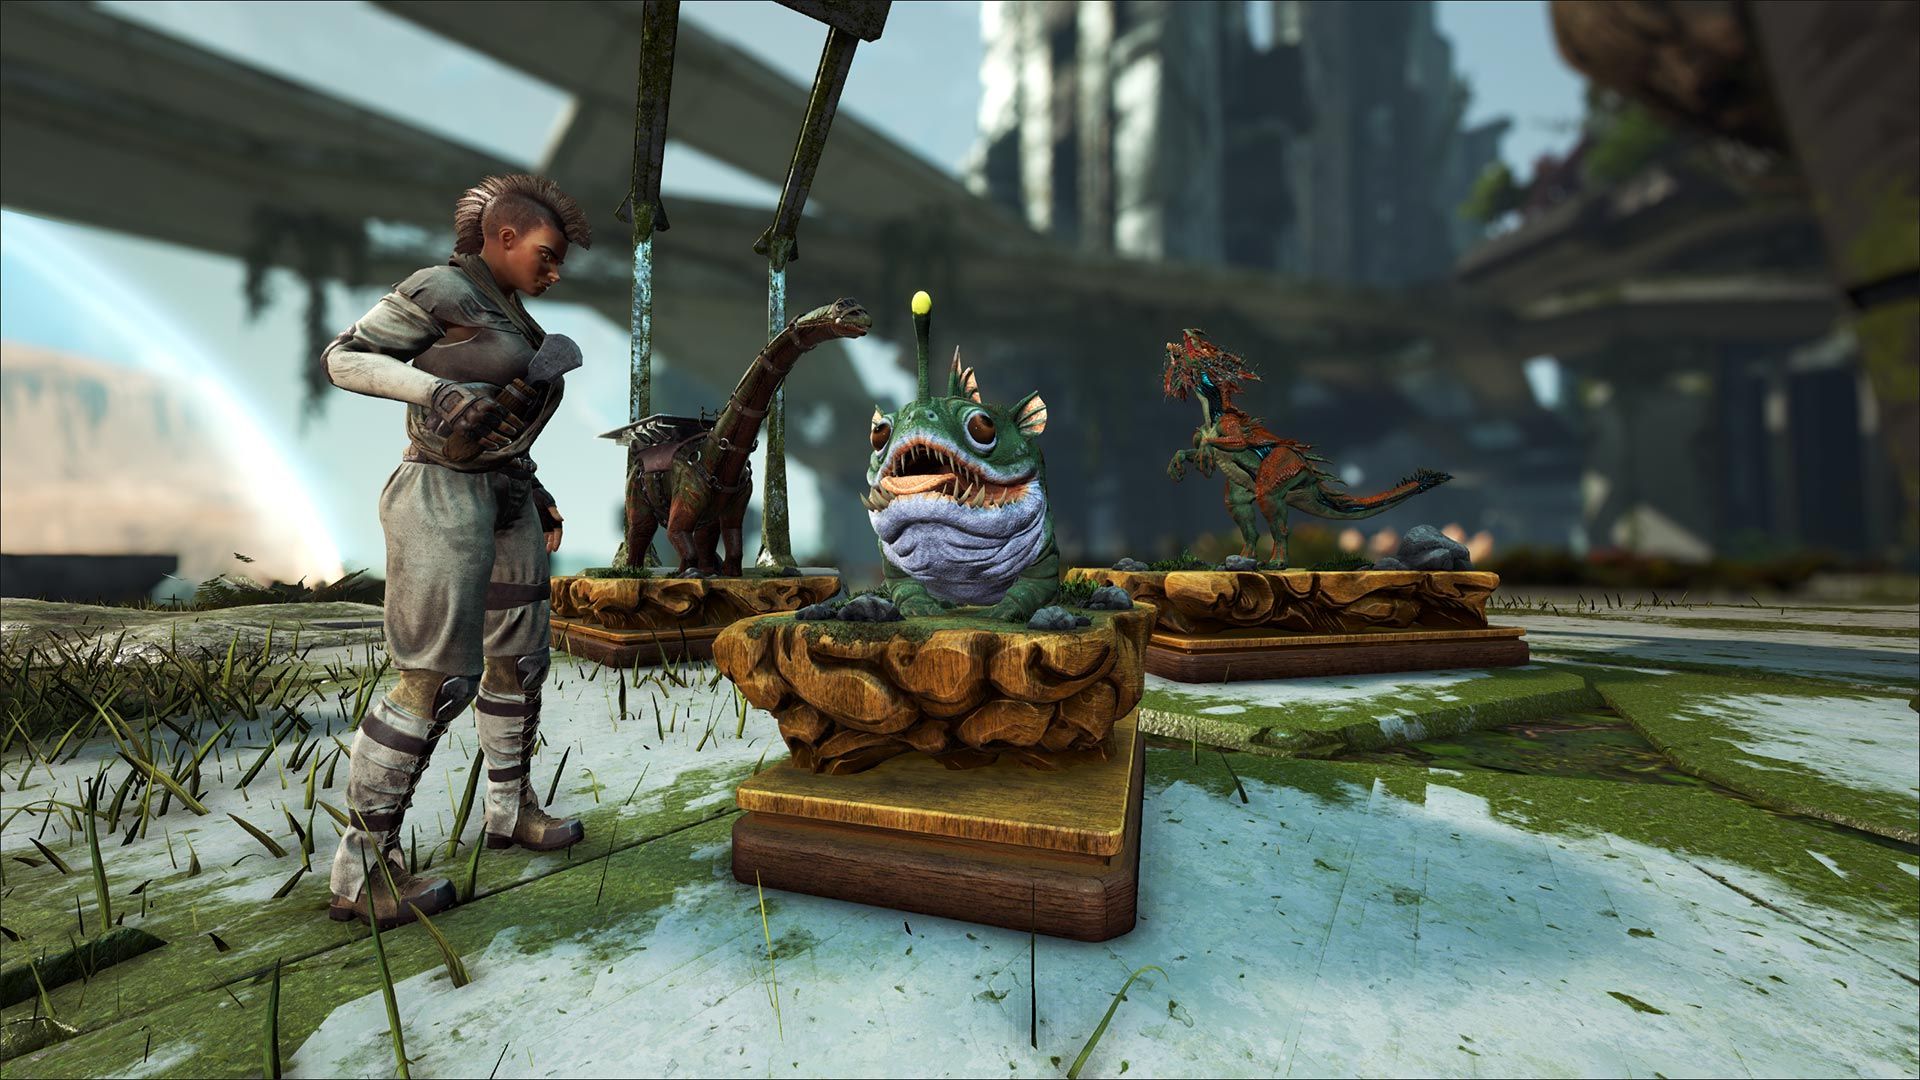 Teasing Løse Lydighed ARK: Survival Evolved' Extinction Release Date Delayed on PS4, Xbox One